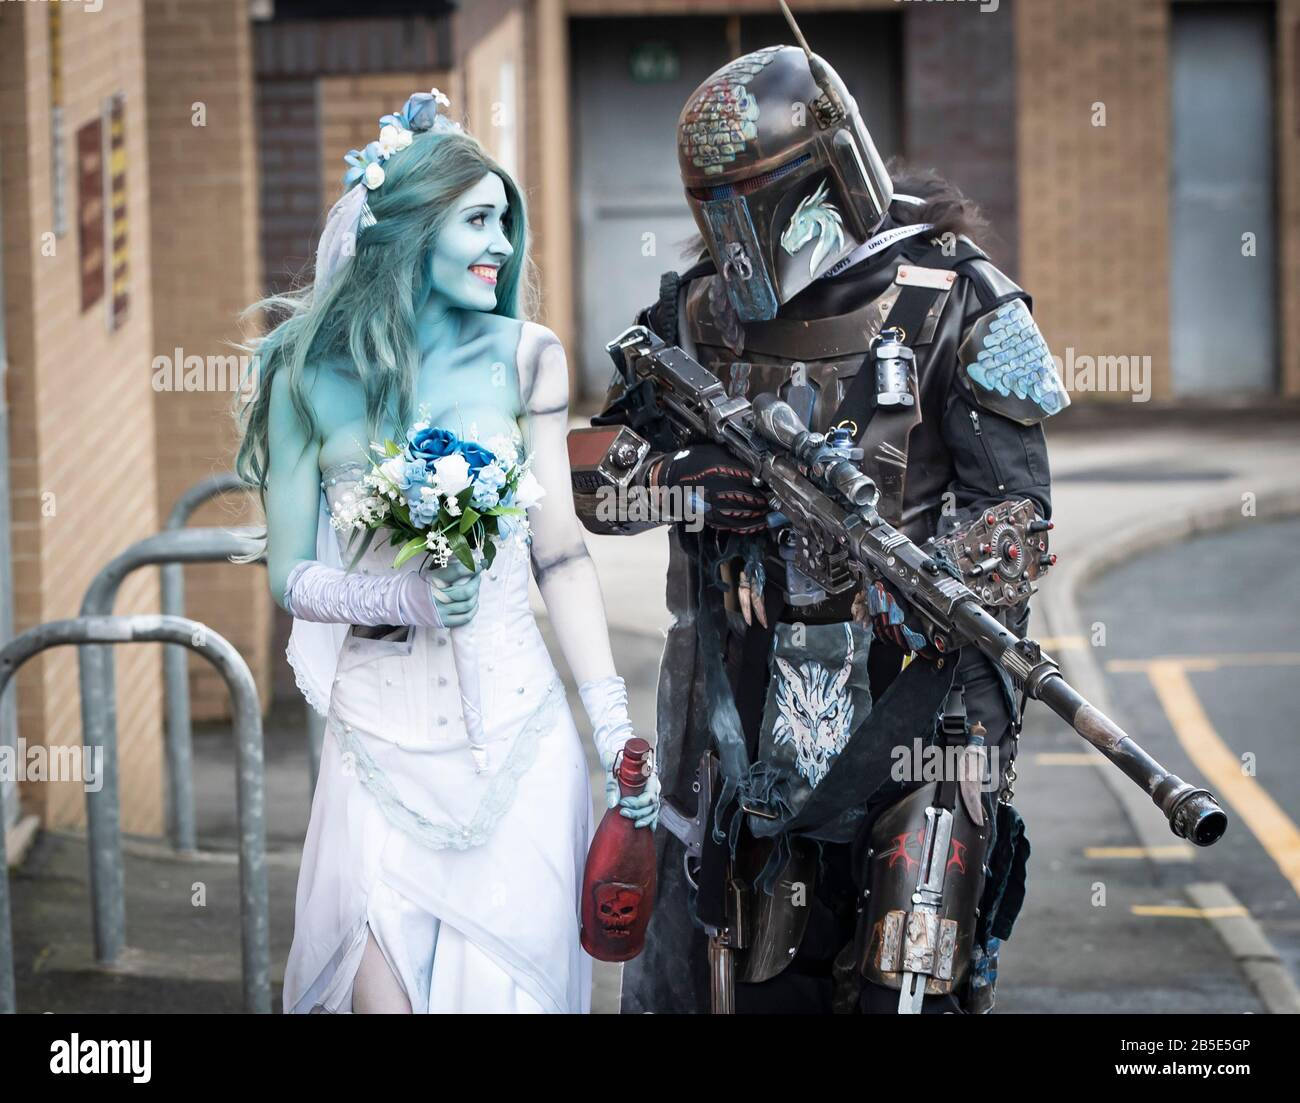 Natalia Williams dressed as Corpse Bride Emily and Tony Knight as a Mandalorian, arrive at the Bradford Unleashed Comic-Con at Bradford City AFC. Stock Photo